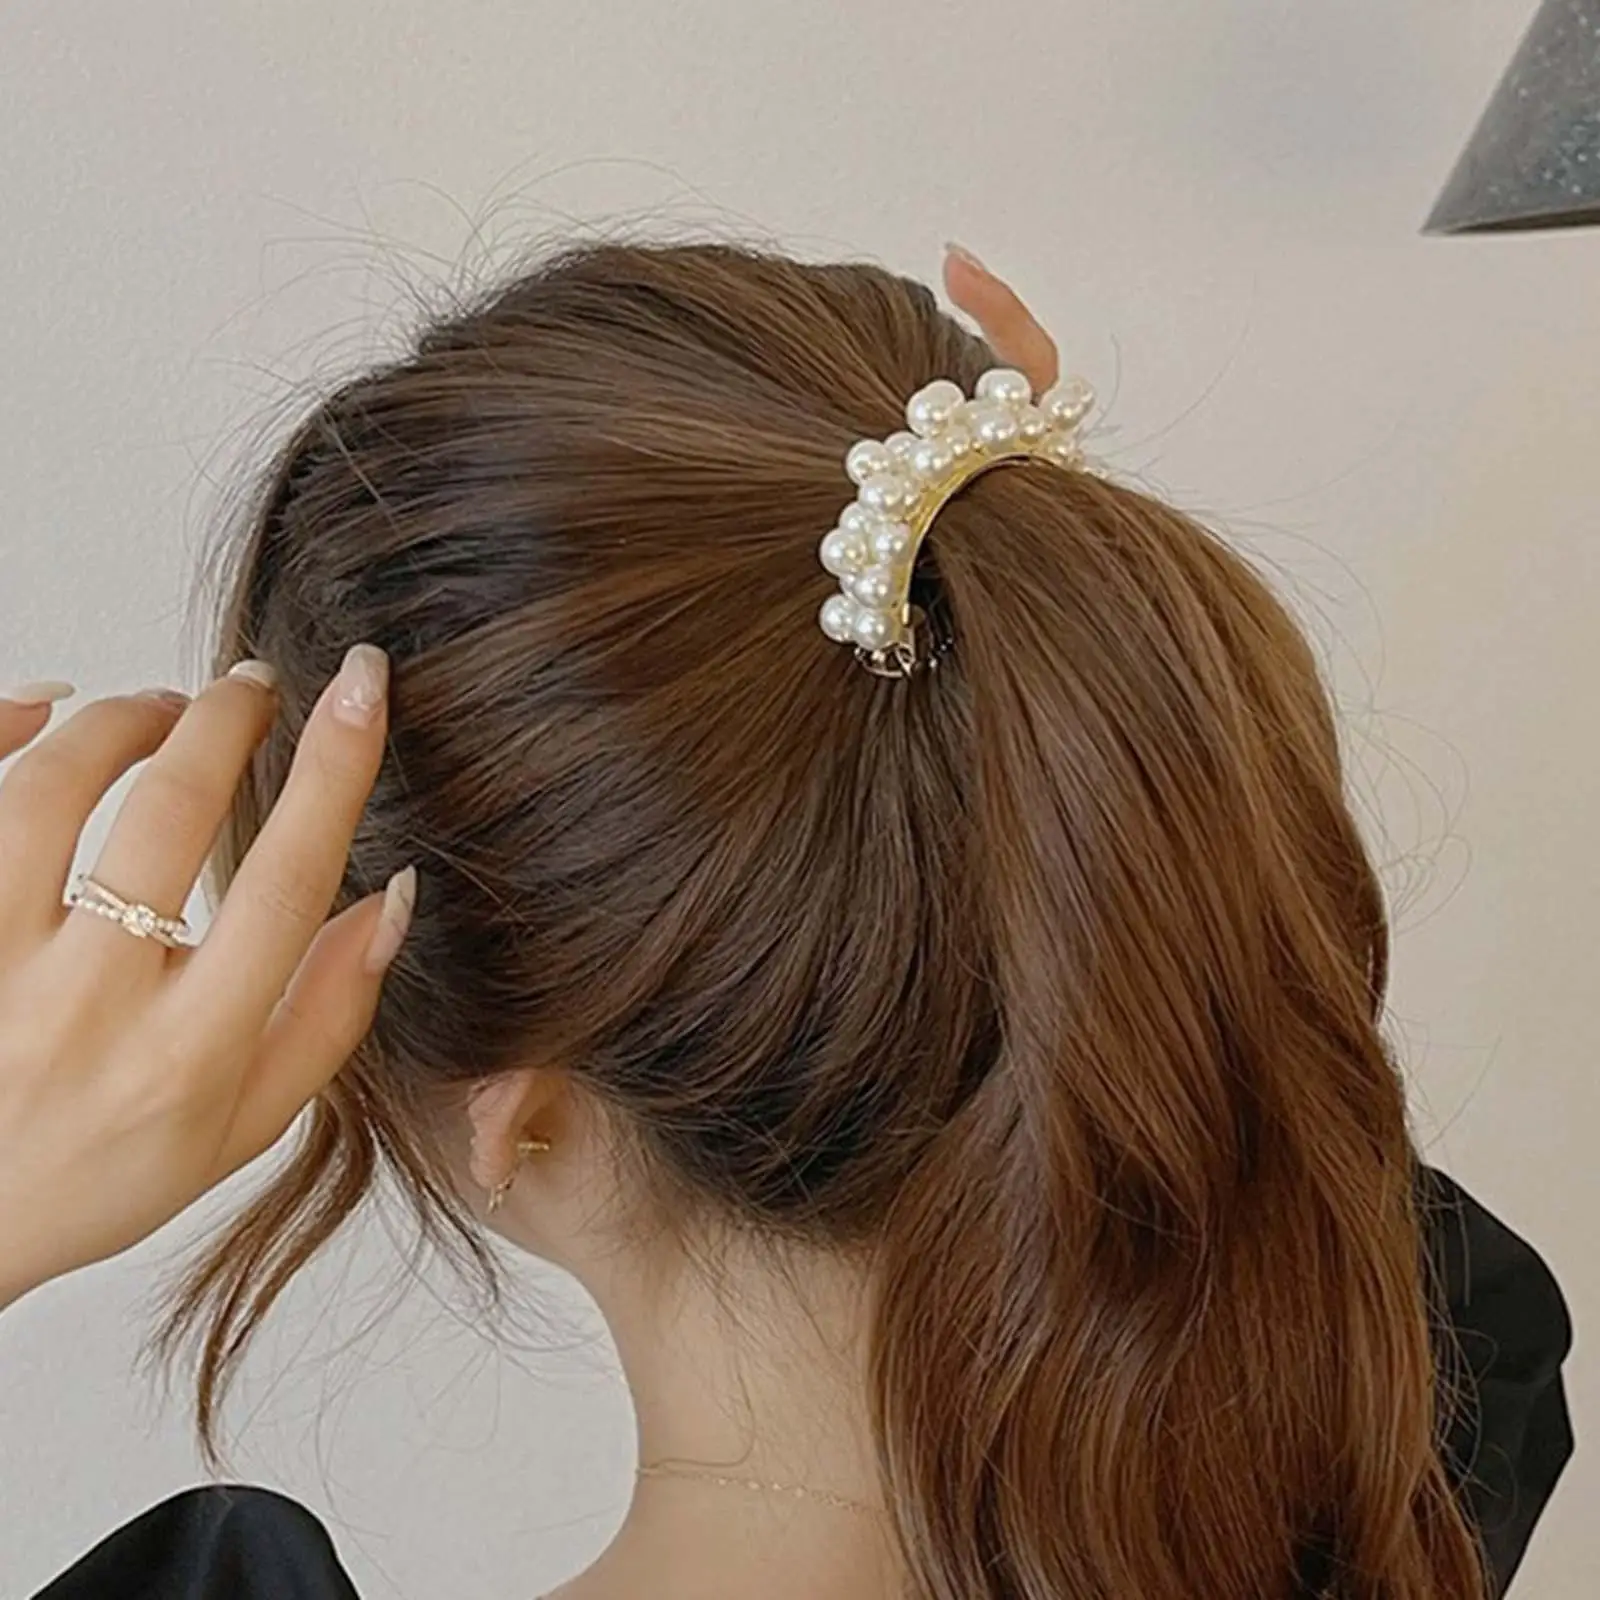  Claw Hair Clips  Pins  Hair Styling Accessories Tool Barrettes for Women Girls Non Slip Wedding 